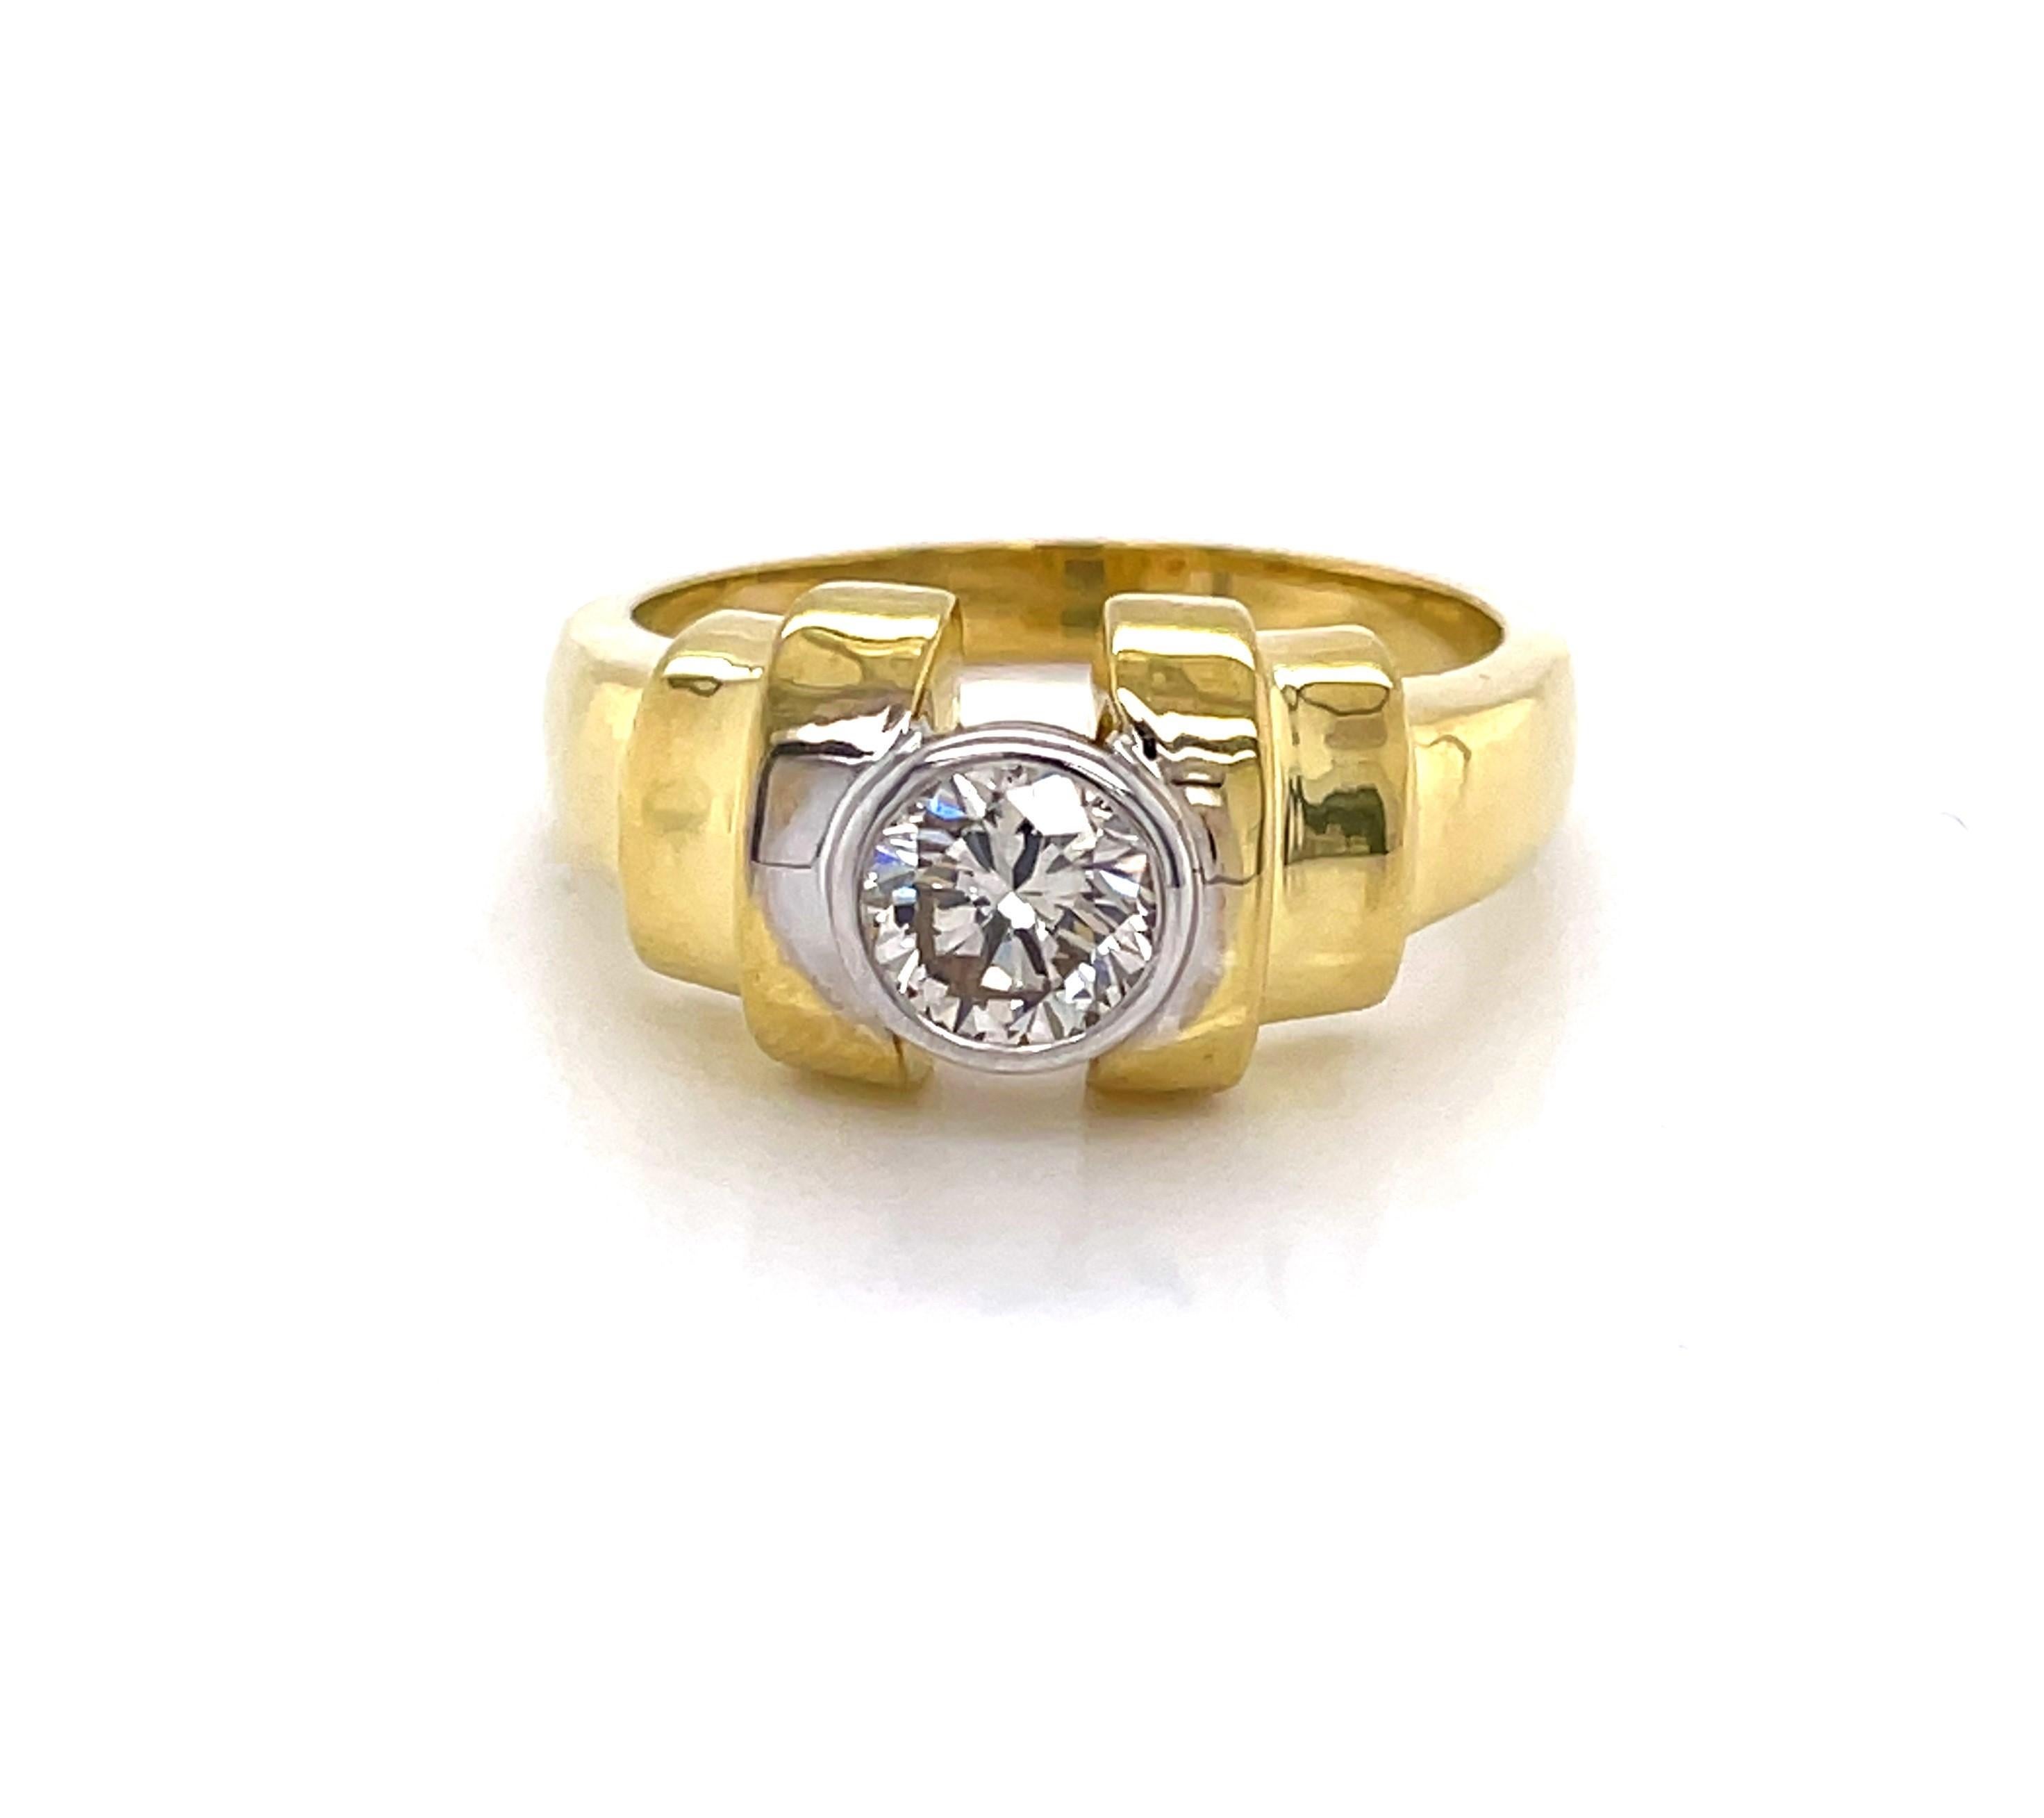 Bezel Set Diamond Solitaire 18 Karat Yellow Gold Estate Ring In Excellent Condition For Sale In Mount Kisco, NY